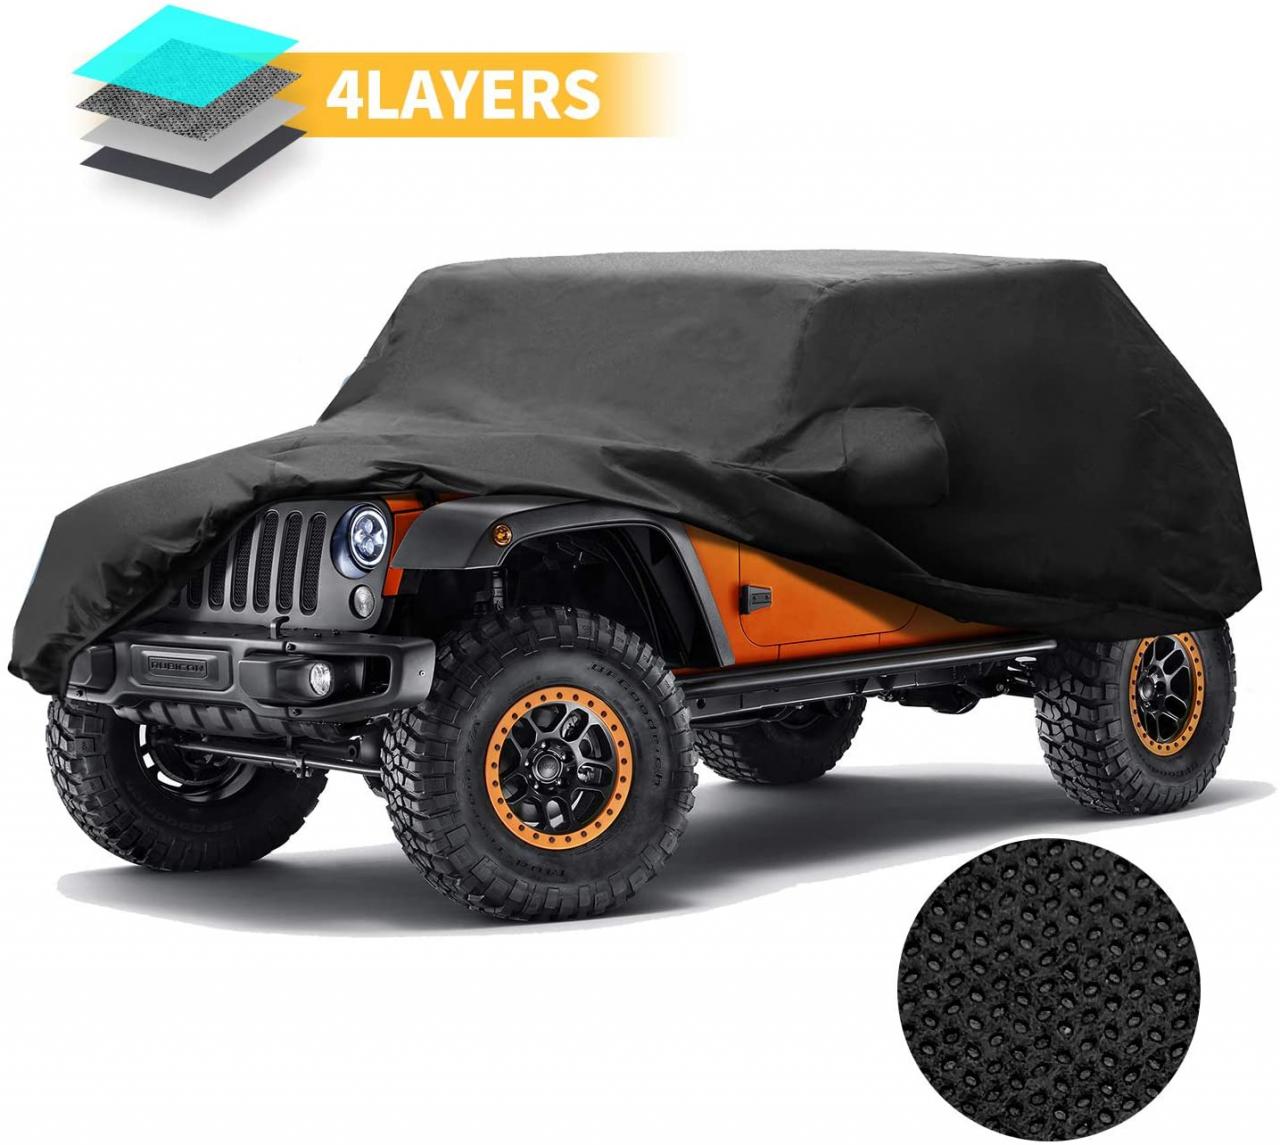 Buy Jeep Cover Jeep Wrangler 4 Door Custom Car Covers Waterproof Black 4  Layers Cover for Jeep Online in Hong Kong. B07W5YYPYG